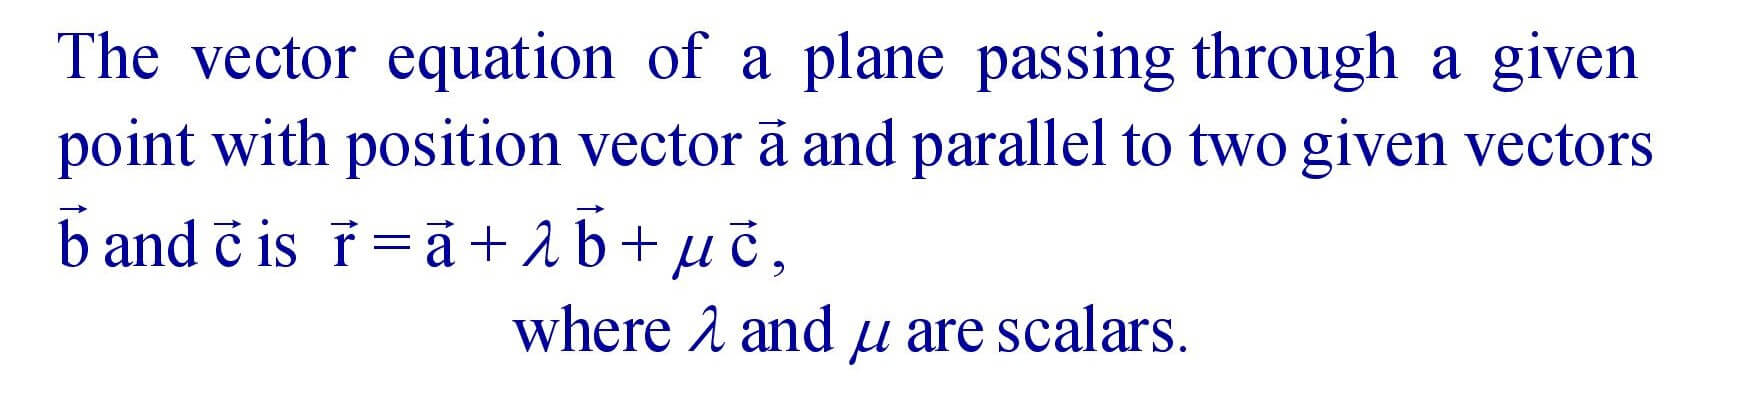 Equation of a plane passing through a given point and parallel to two given lines